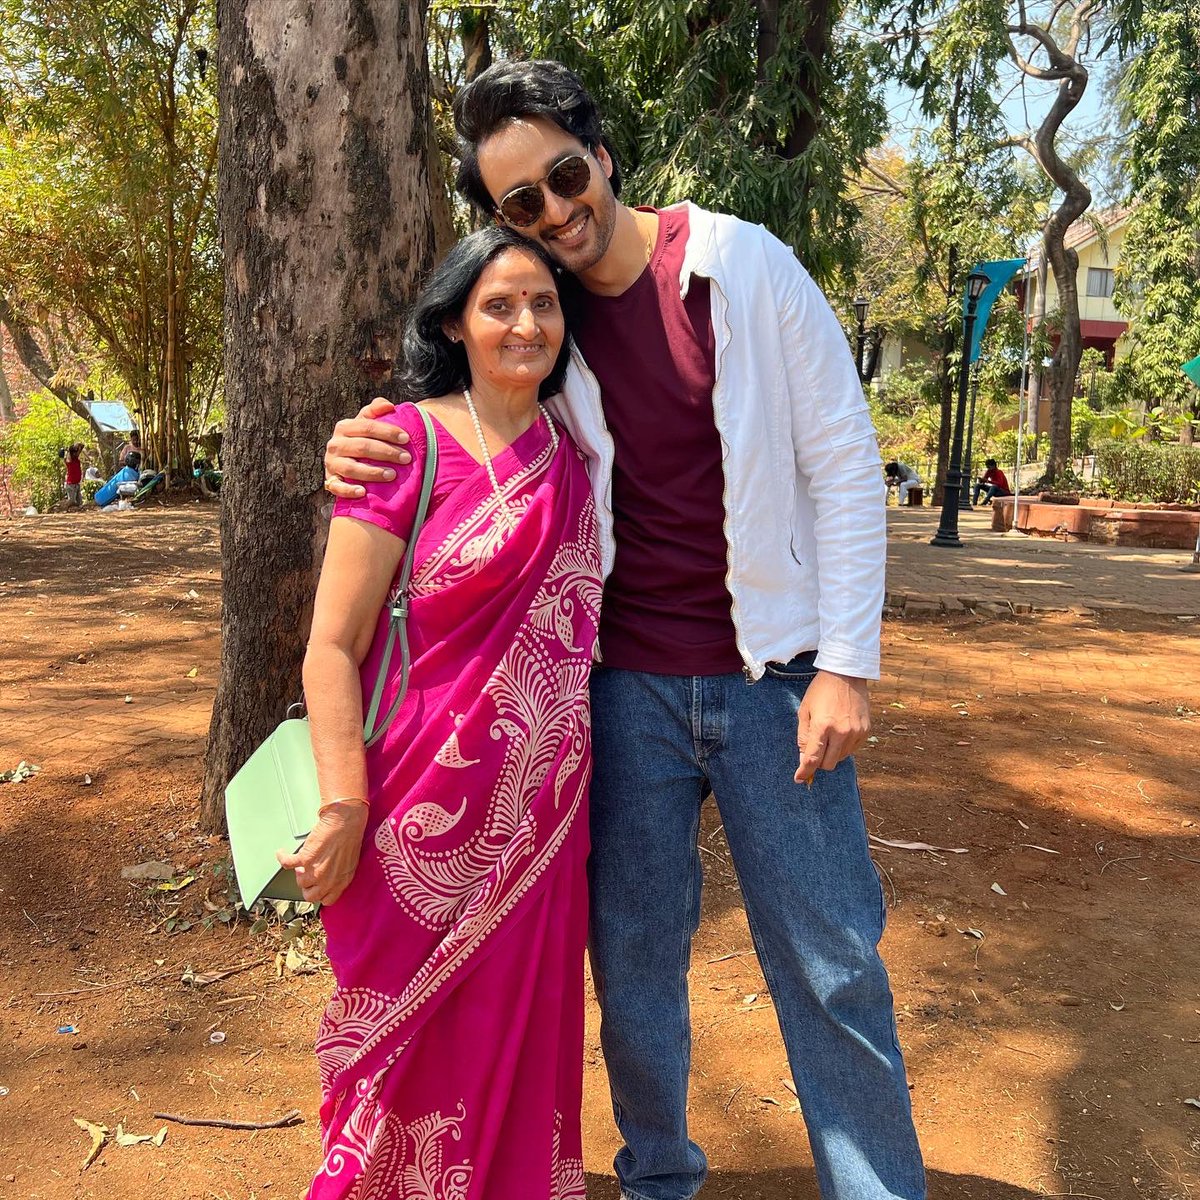 Maa rarely comes at my work place, but whenever she does it feels good❤️ instagram.com/p/C5IVs4xoP8X/